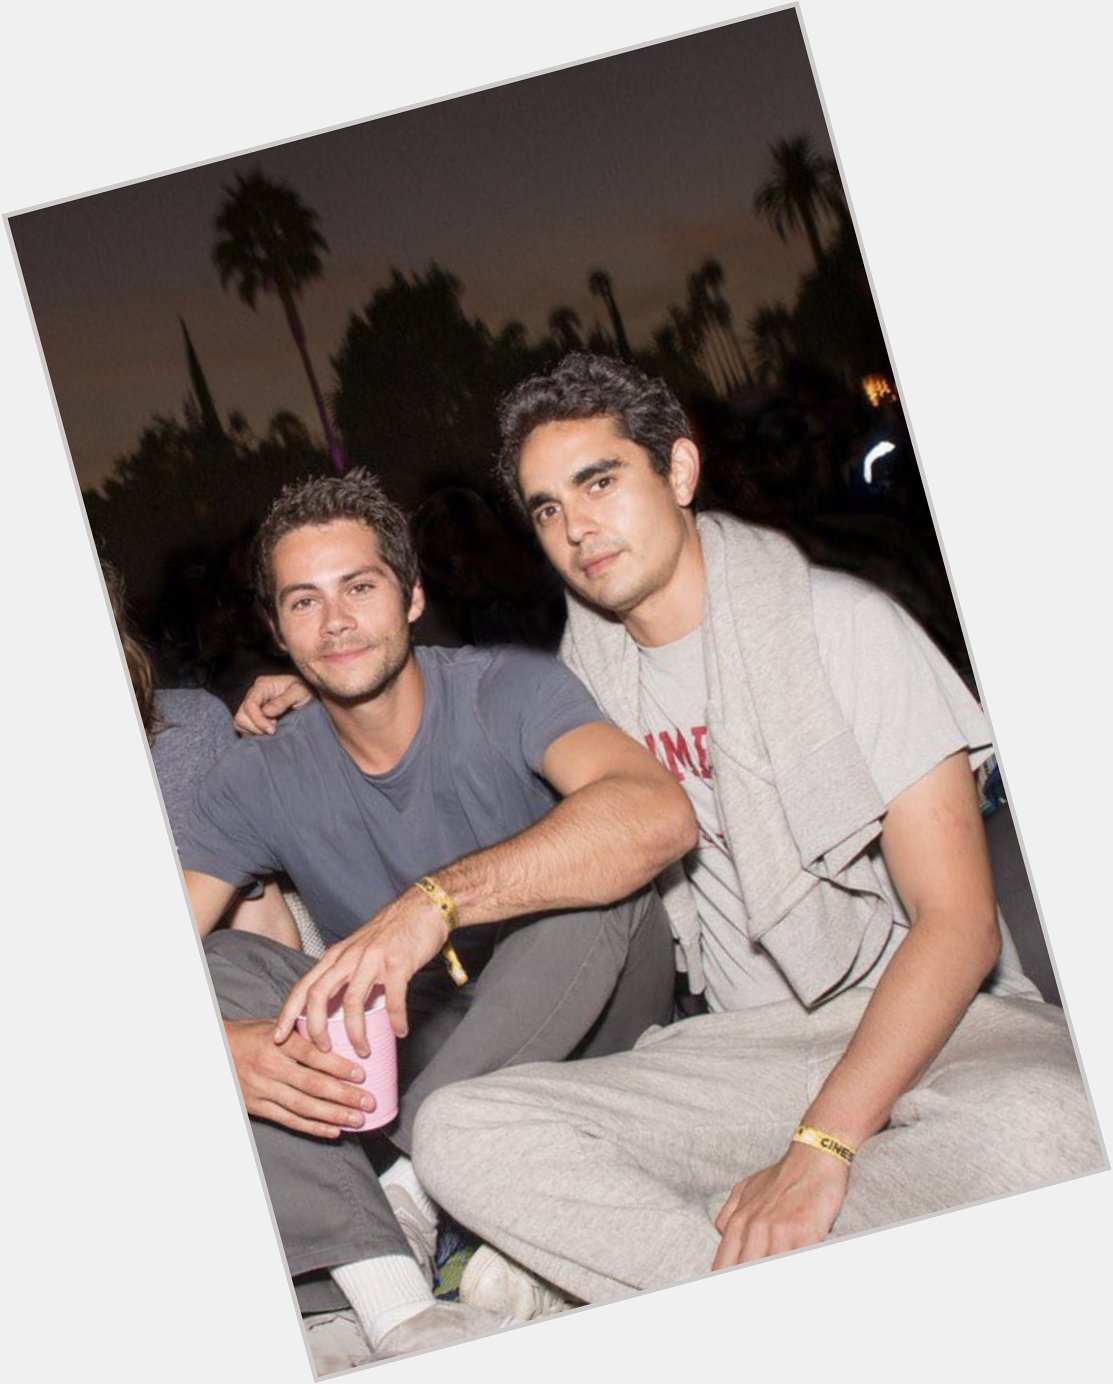 The friendship between dylan o\brien and max minghella is so special  happy birthday Max!! 